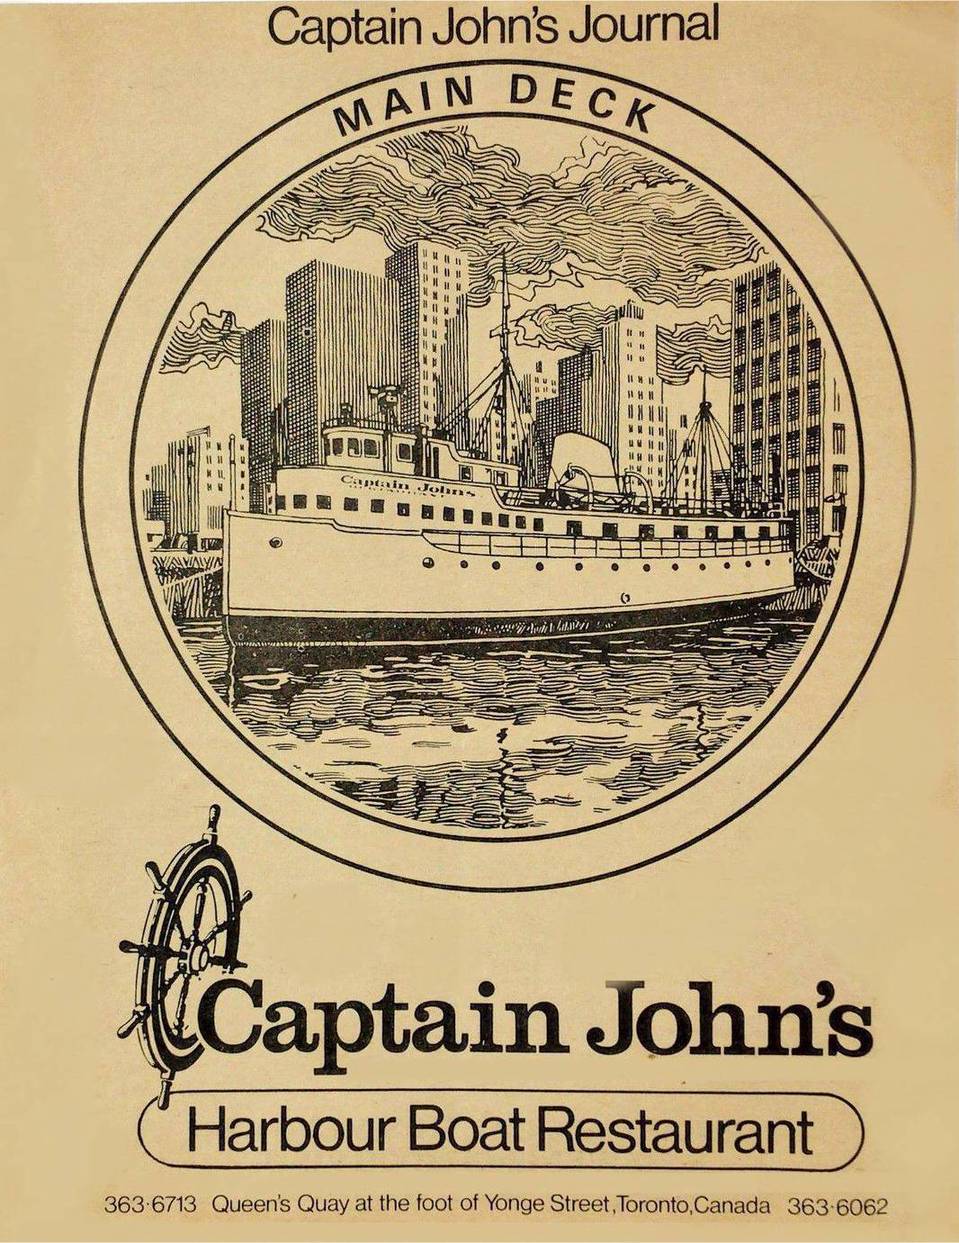 A MENU - TORONTO - CAPTAIN JOHN'S HABOUR BOAT RESTAURANT - QUEEN'S QUAY AT THE FOOT OF YONGE - COVER - c1980